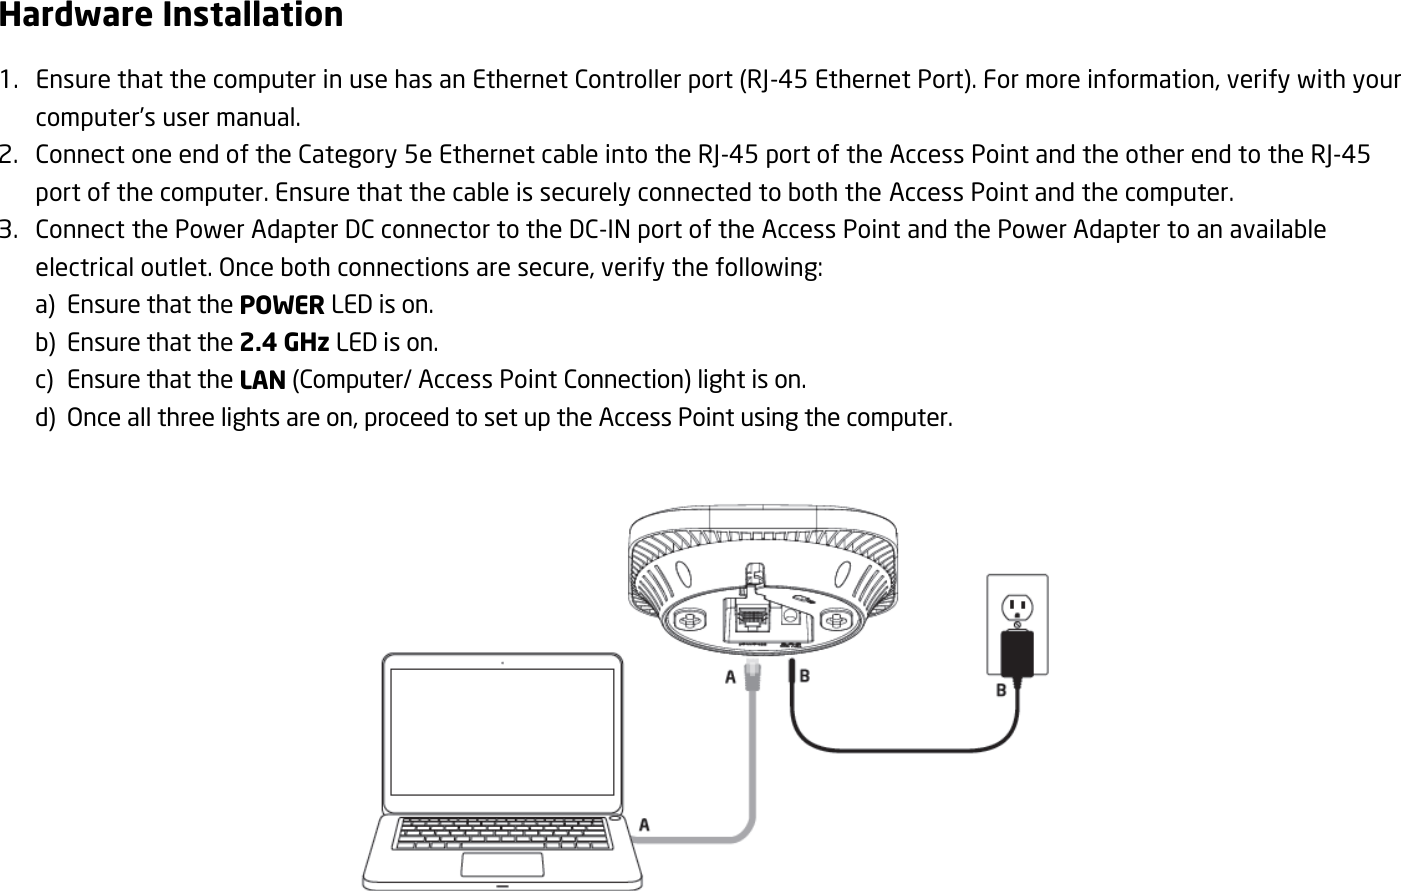 Hardware Installation 1. Ensure that the computer in use has an Ethernet Controller port (RJ-45 Ethernet Port). For more information, verify with your computer’s user manual. 2. Connect one end of the Category 5e Ethernet cable into the RJ-45 port of the Access Point and the other end to the RJ-45 port of the computer. Ensure that the cable is securely connected to both the Access Point and the computer. 3. Connect the Power Adapter DC connector to the DC-IN port of the Access Point and the Power Adapter to an available electrical outlet. Once both connections are secure, verify the following:     a)  Ensure that the POWER LED is on.     b)  Ensure that the 2.4 GHz LED is on.     c)  Ensure that the LAN (Computer/ Access Point Connection) light is on.     d)  Once all three lights are on, proceed to set up the Access Point using the computer.    